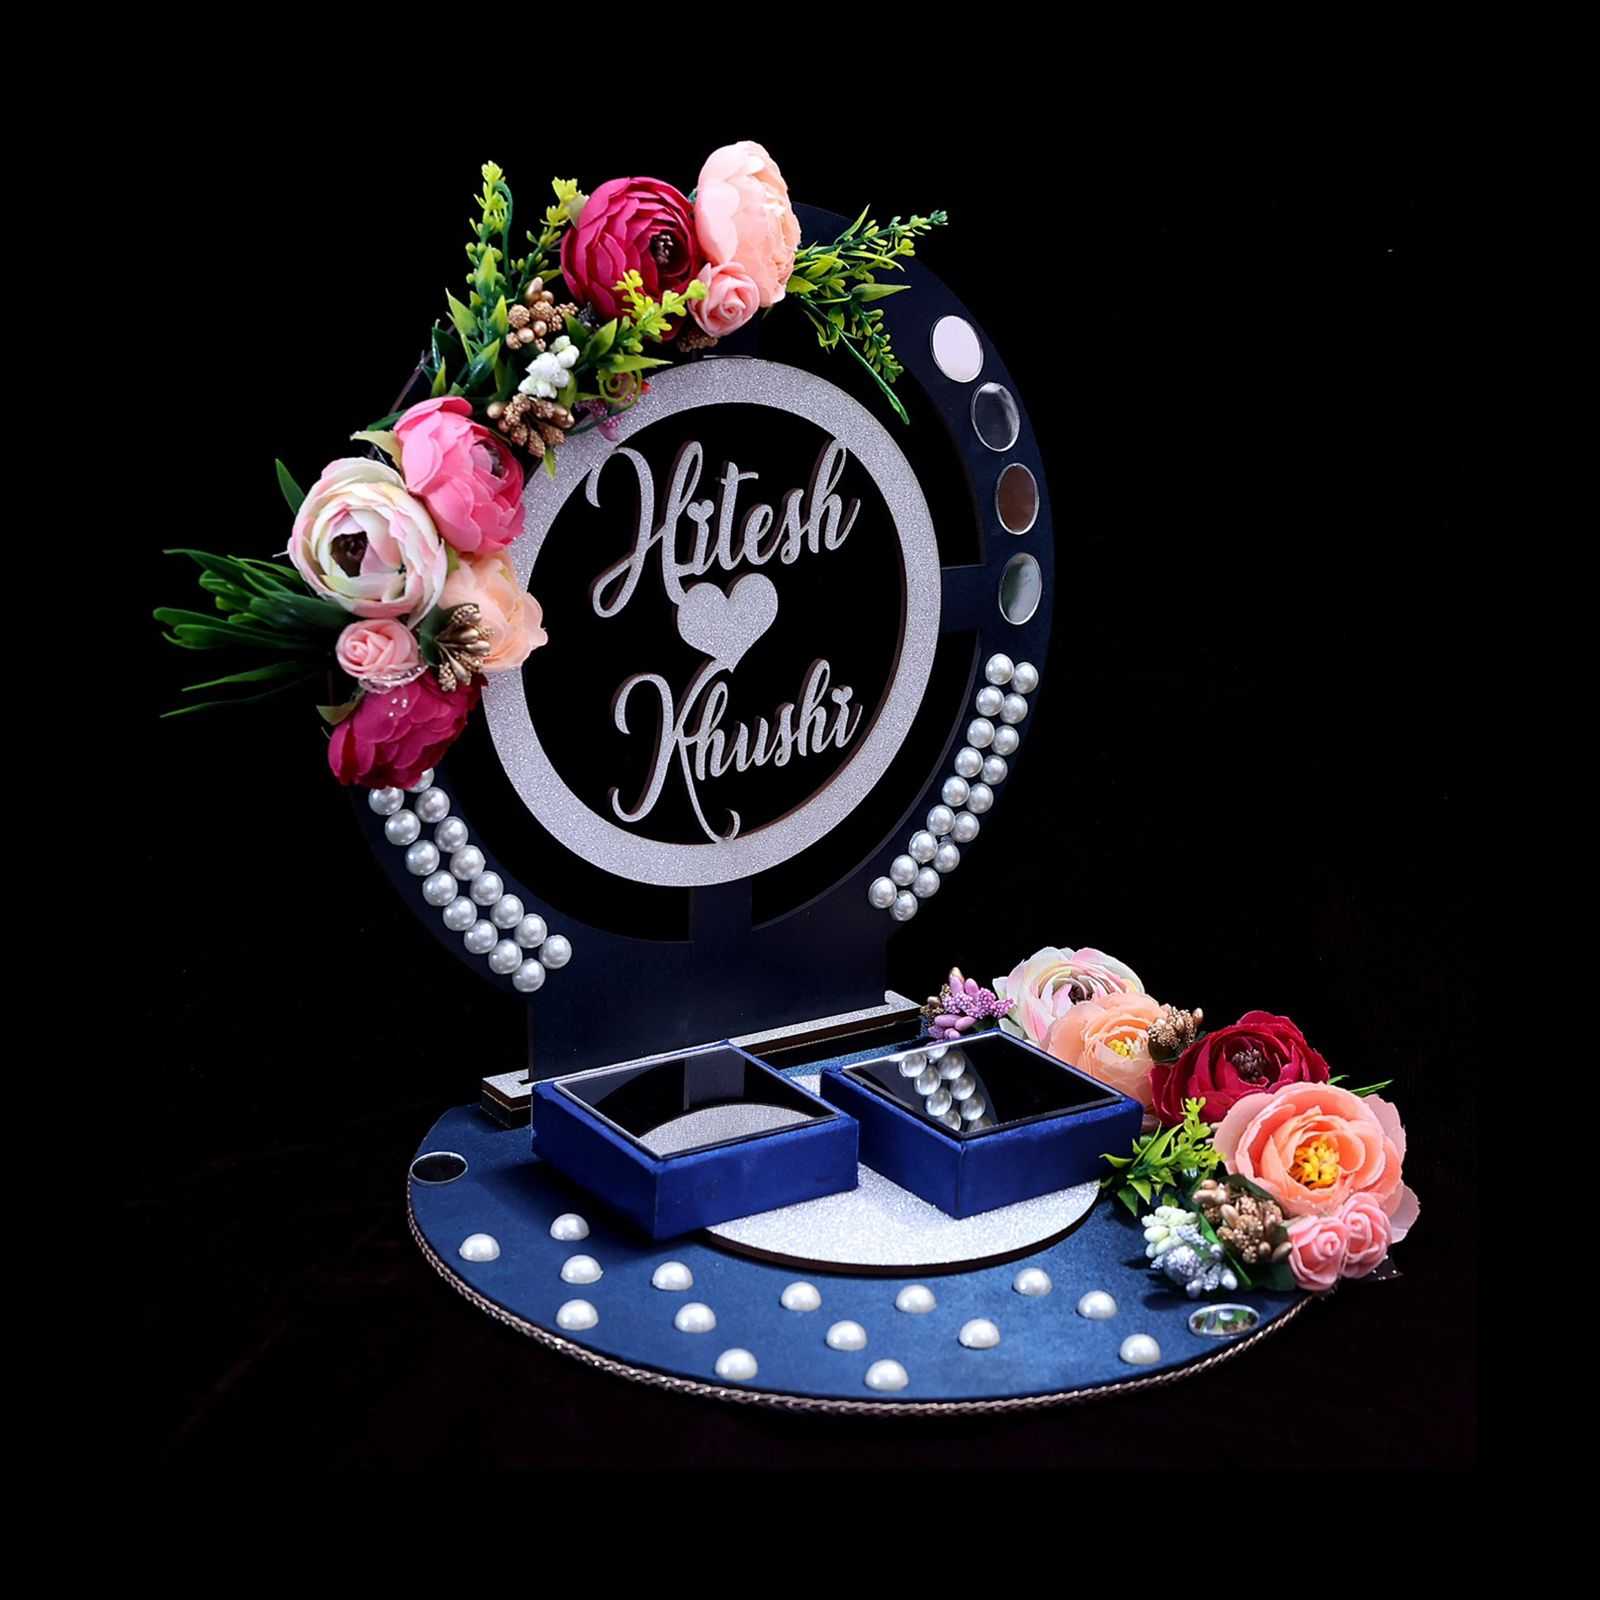 GiftsBouquet Ring Platter for Wedding/Engagement/Ring Ceremony/Ring Holder/ Tray Wood Decorative Platter Price in India - Buy GiftsBouquet Ring Platter  for Wedding/Engagement/Ring Ceremony/Ring Holder/Tray Wood Decorative  Platter online at Flipkart.com